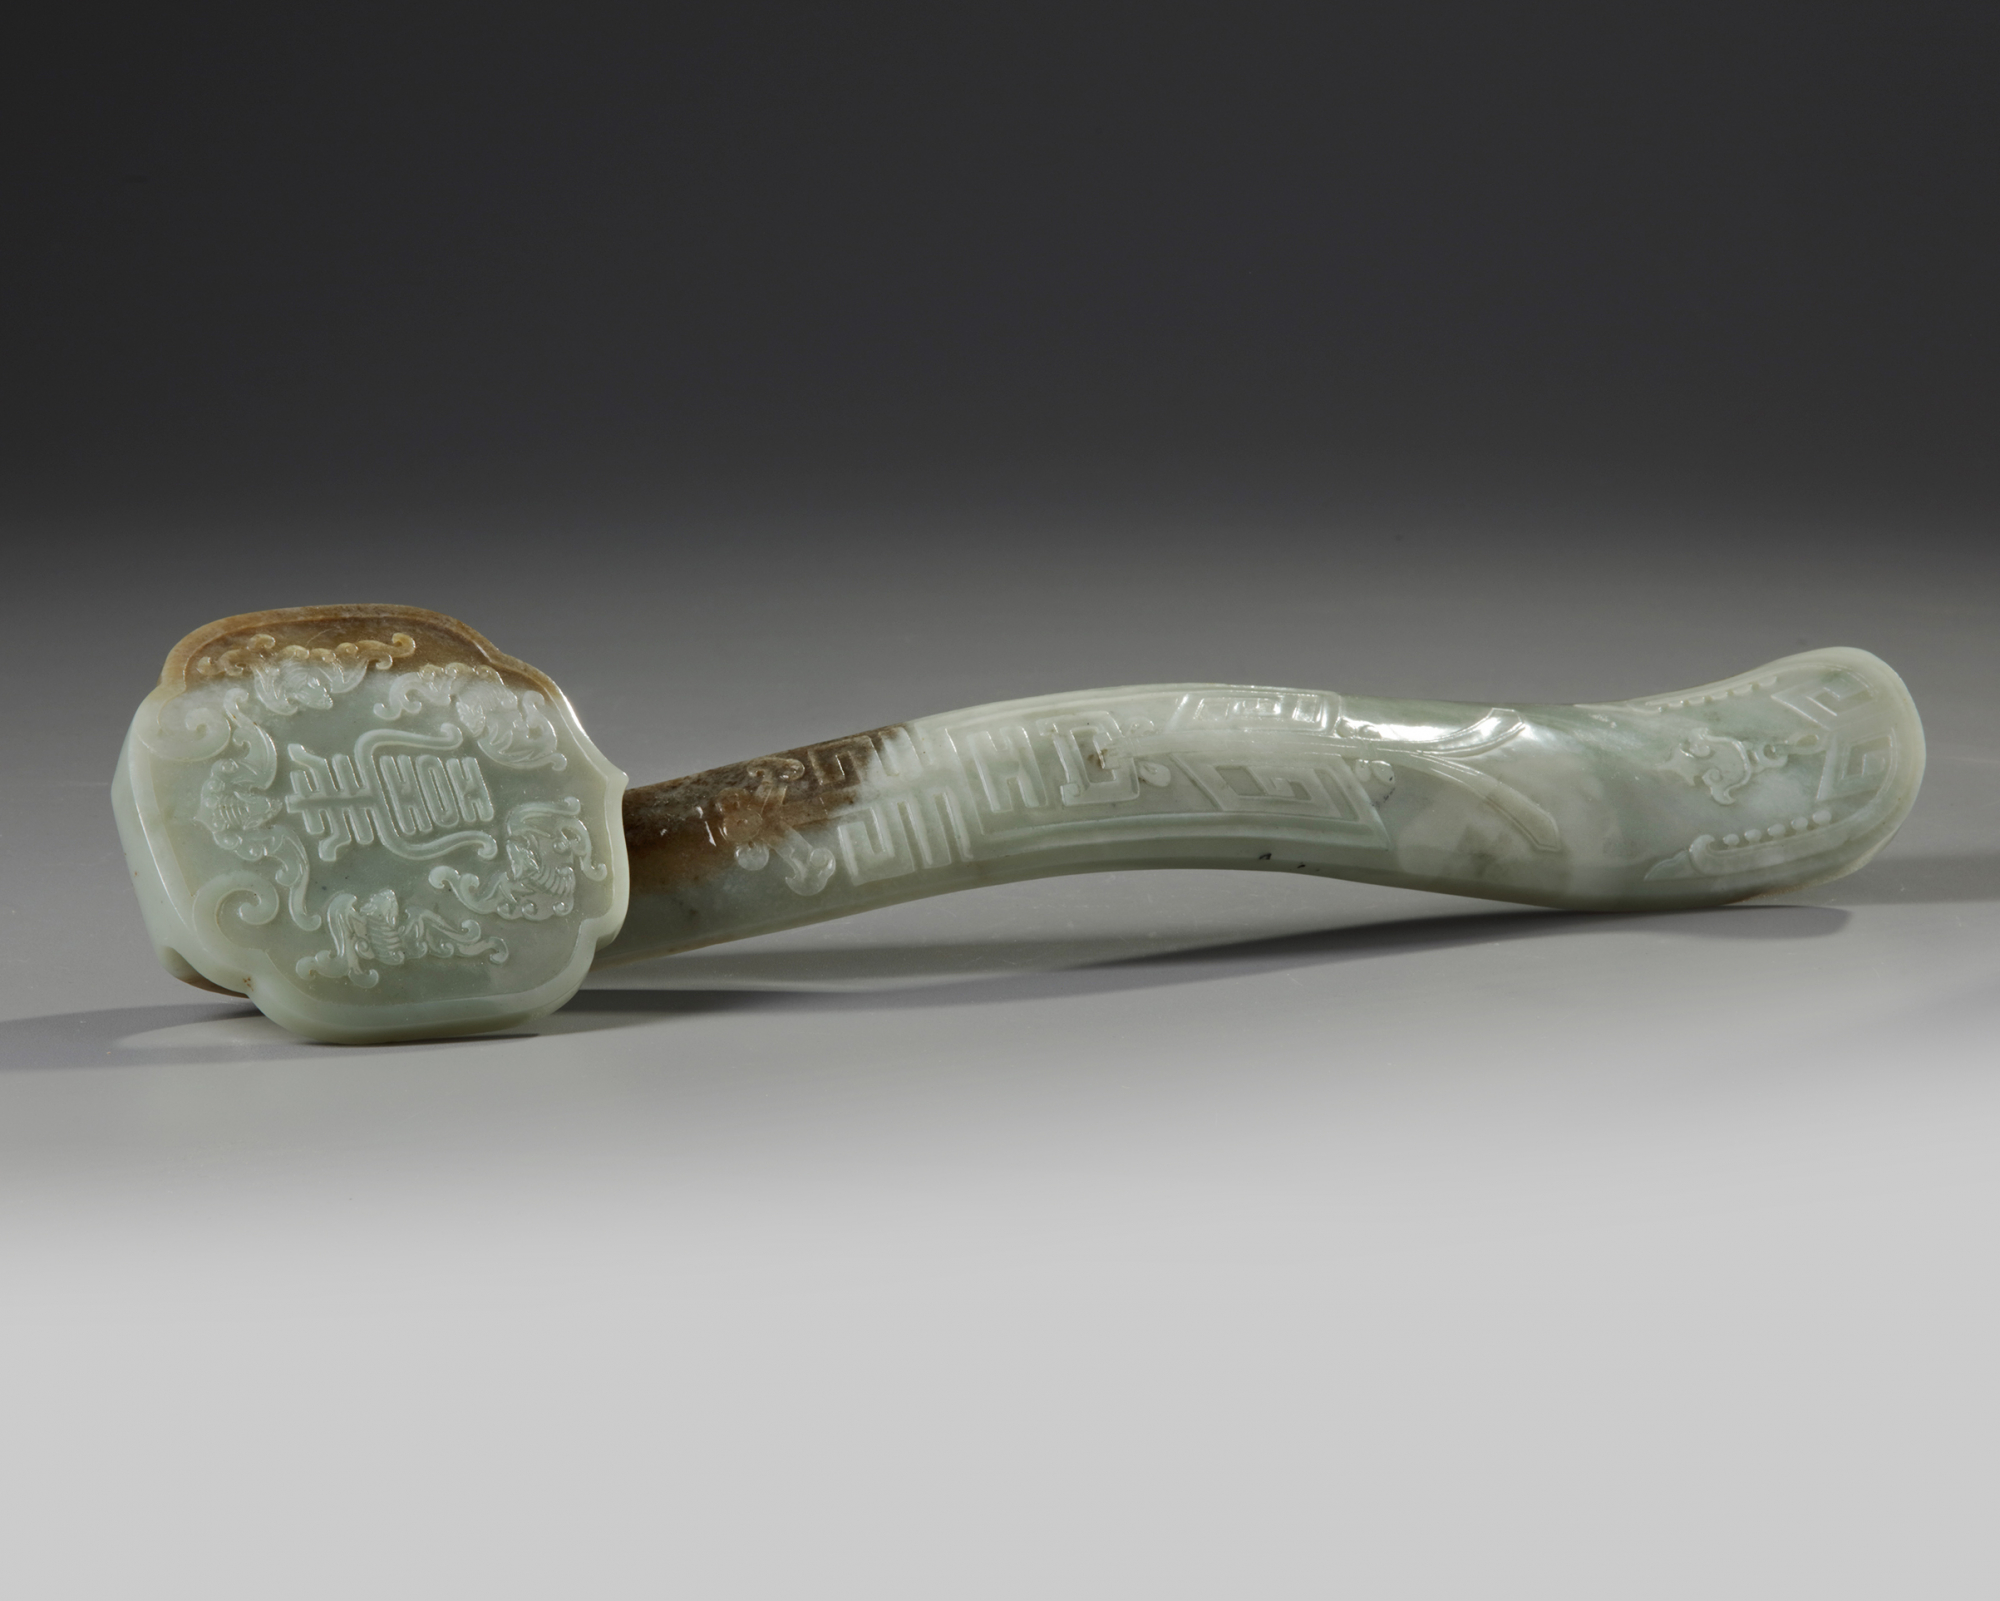 A Chinese pale celadon jade scepter - Image 4 of 4